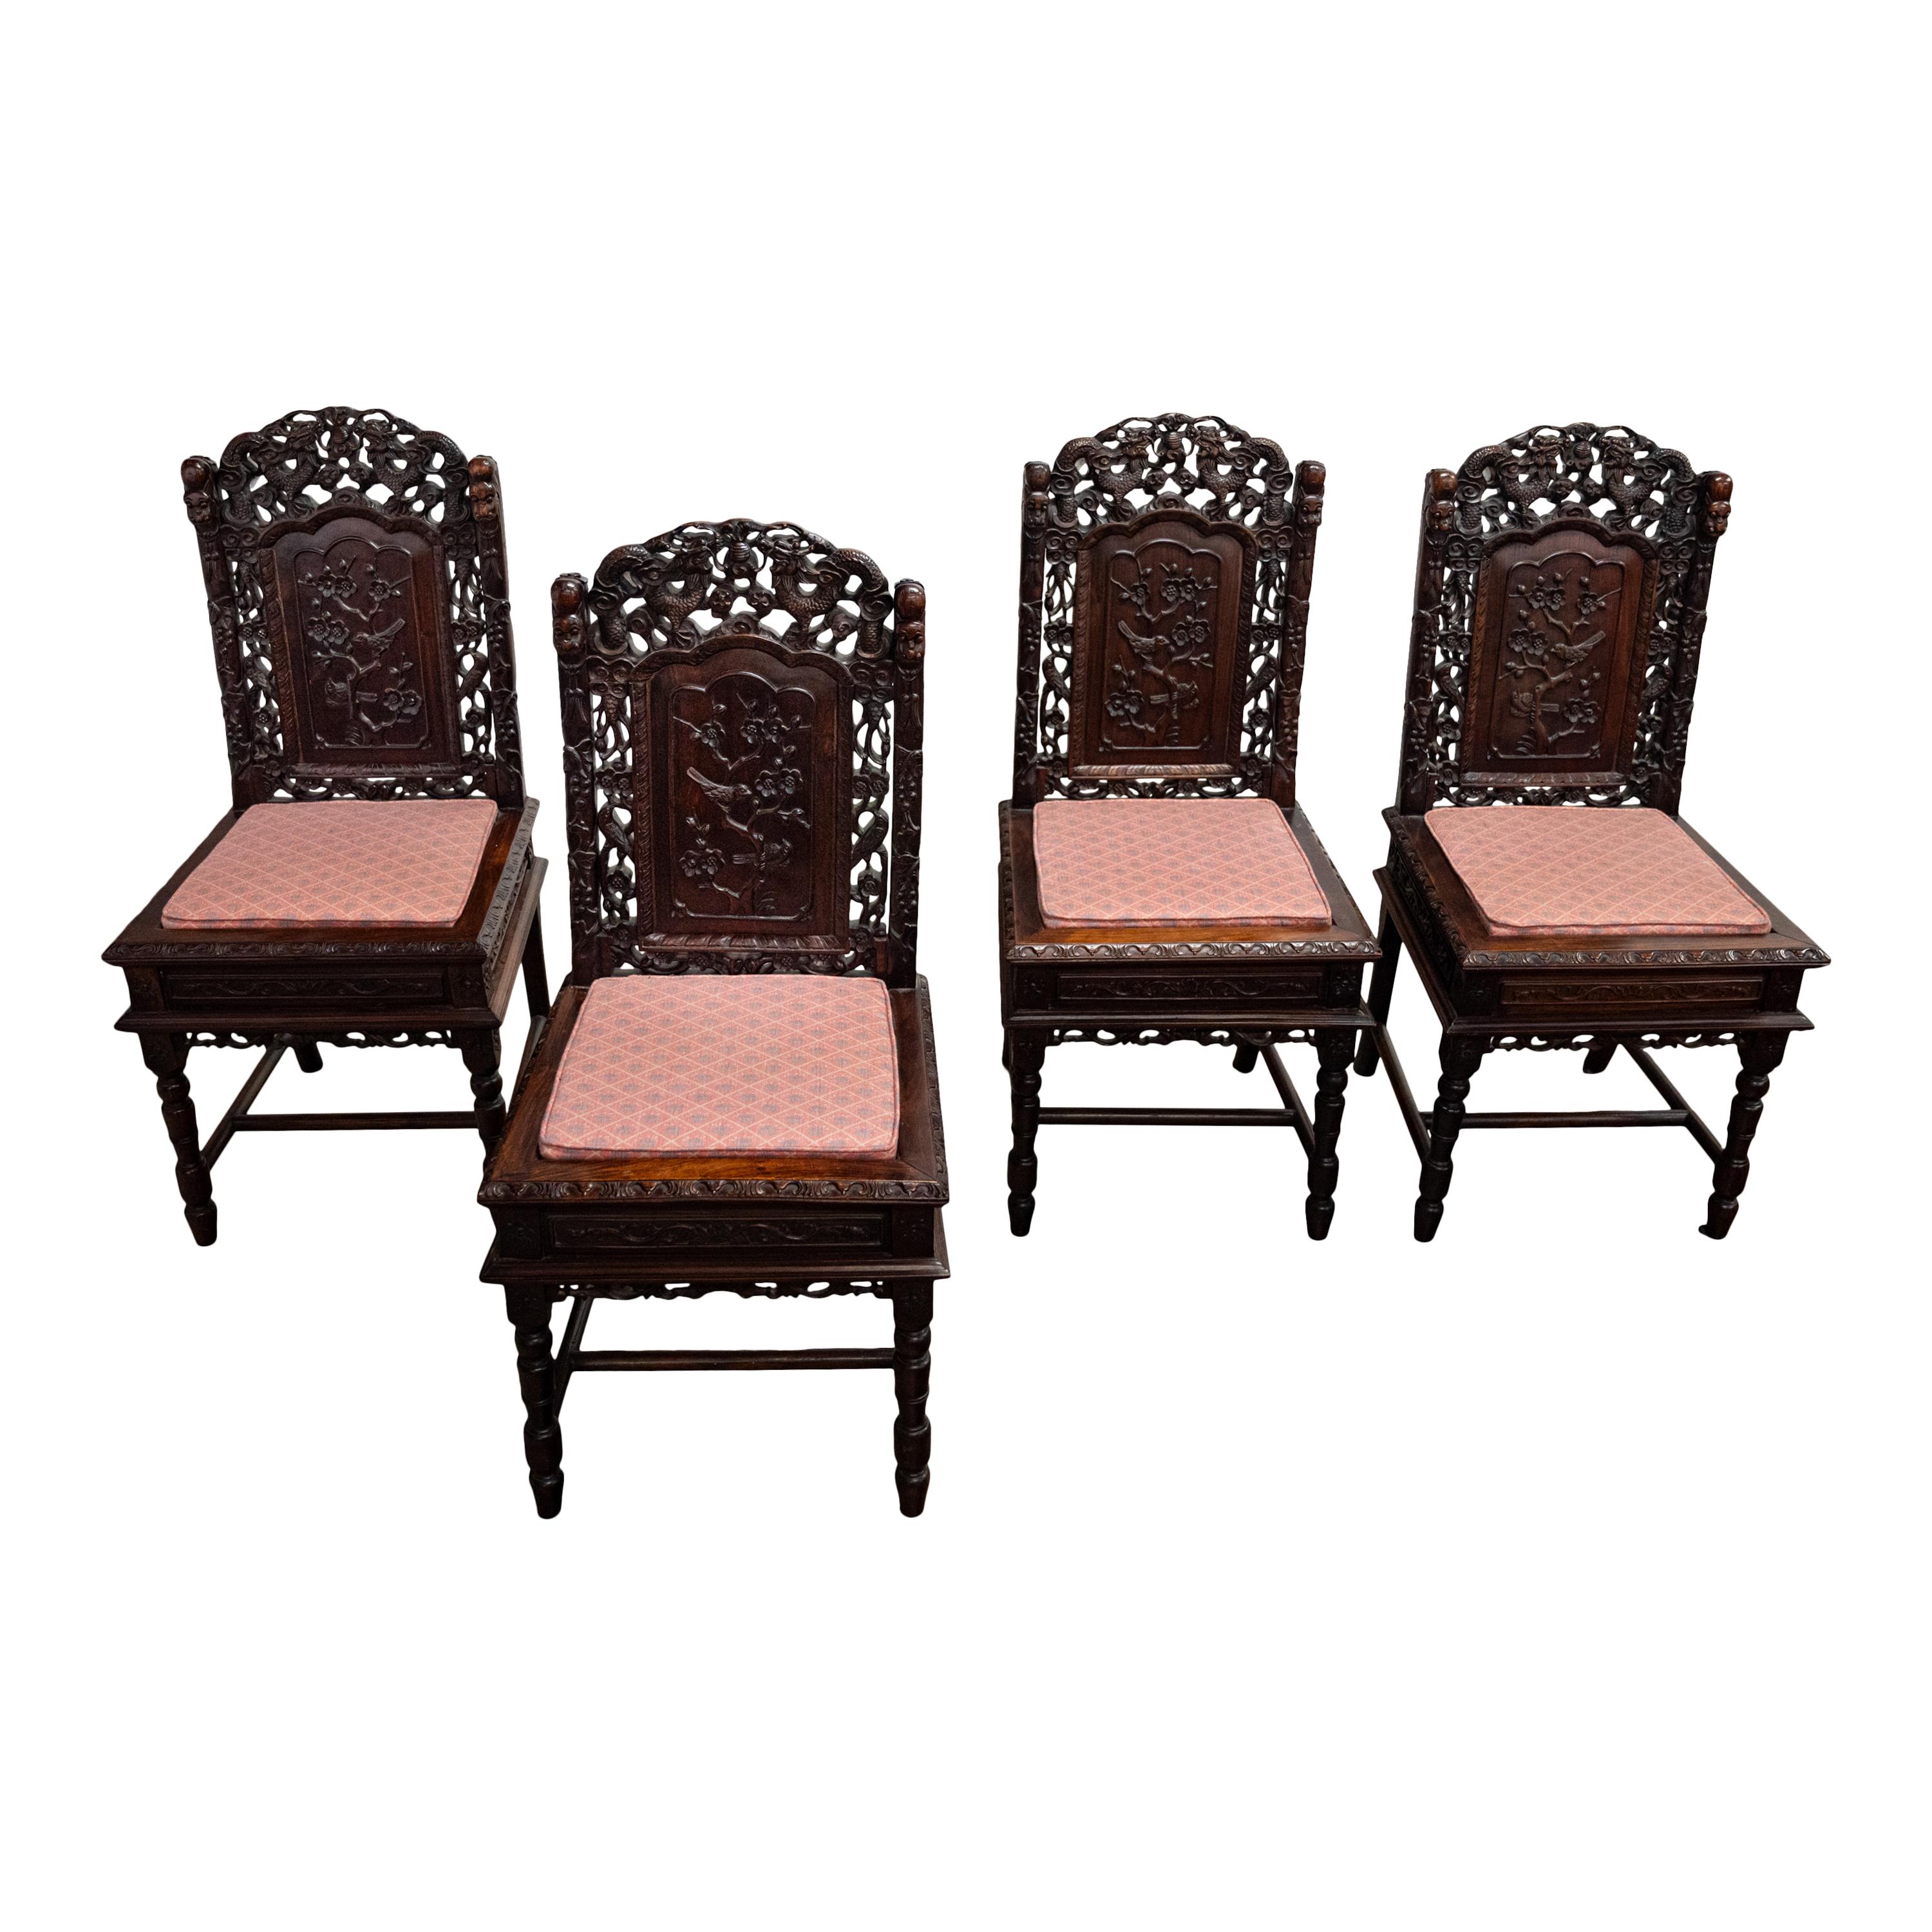 Vier antike Qing Dynasty Chinese Carved Rosewood Side Dining Dragon Chairs 1880 im Zustand „Gut“ im Angebot in Portland, OR